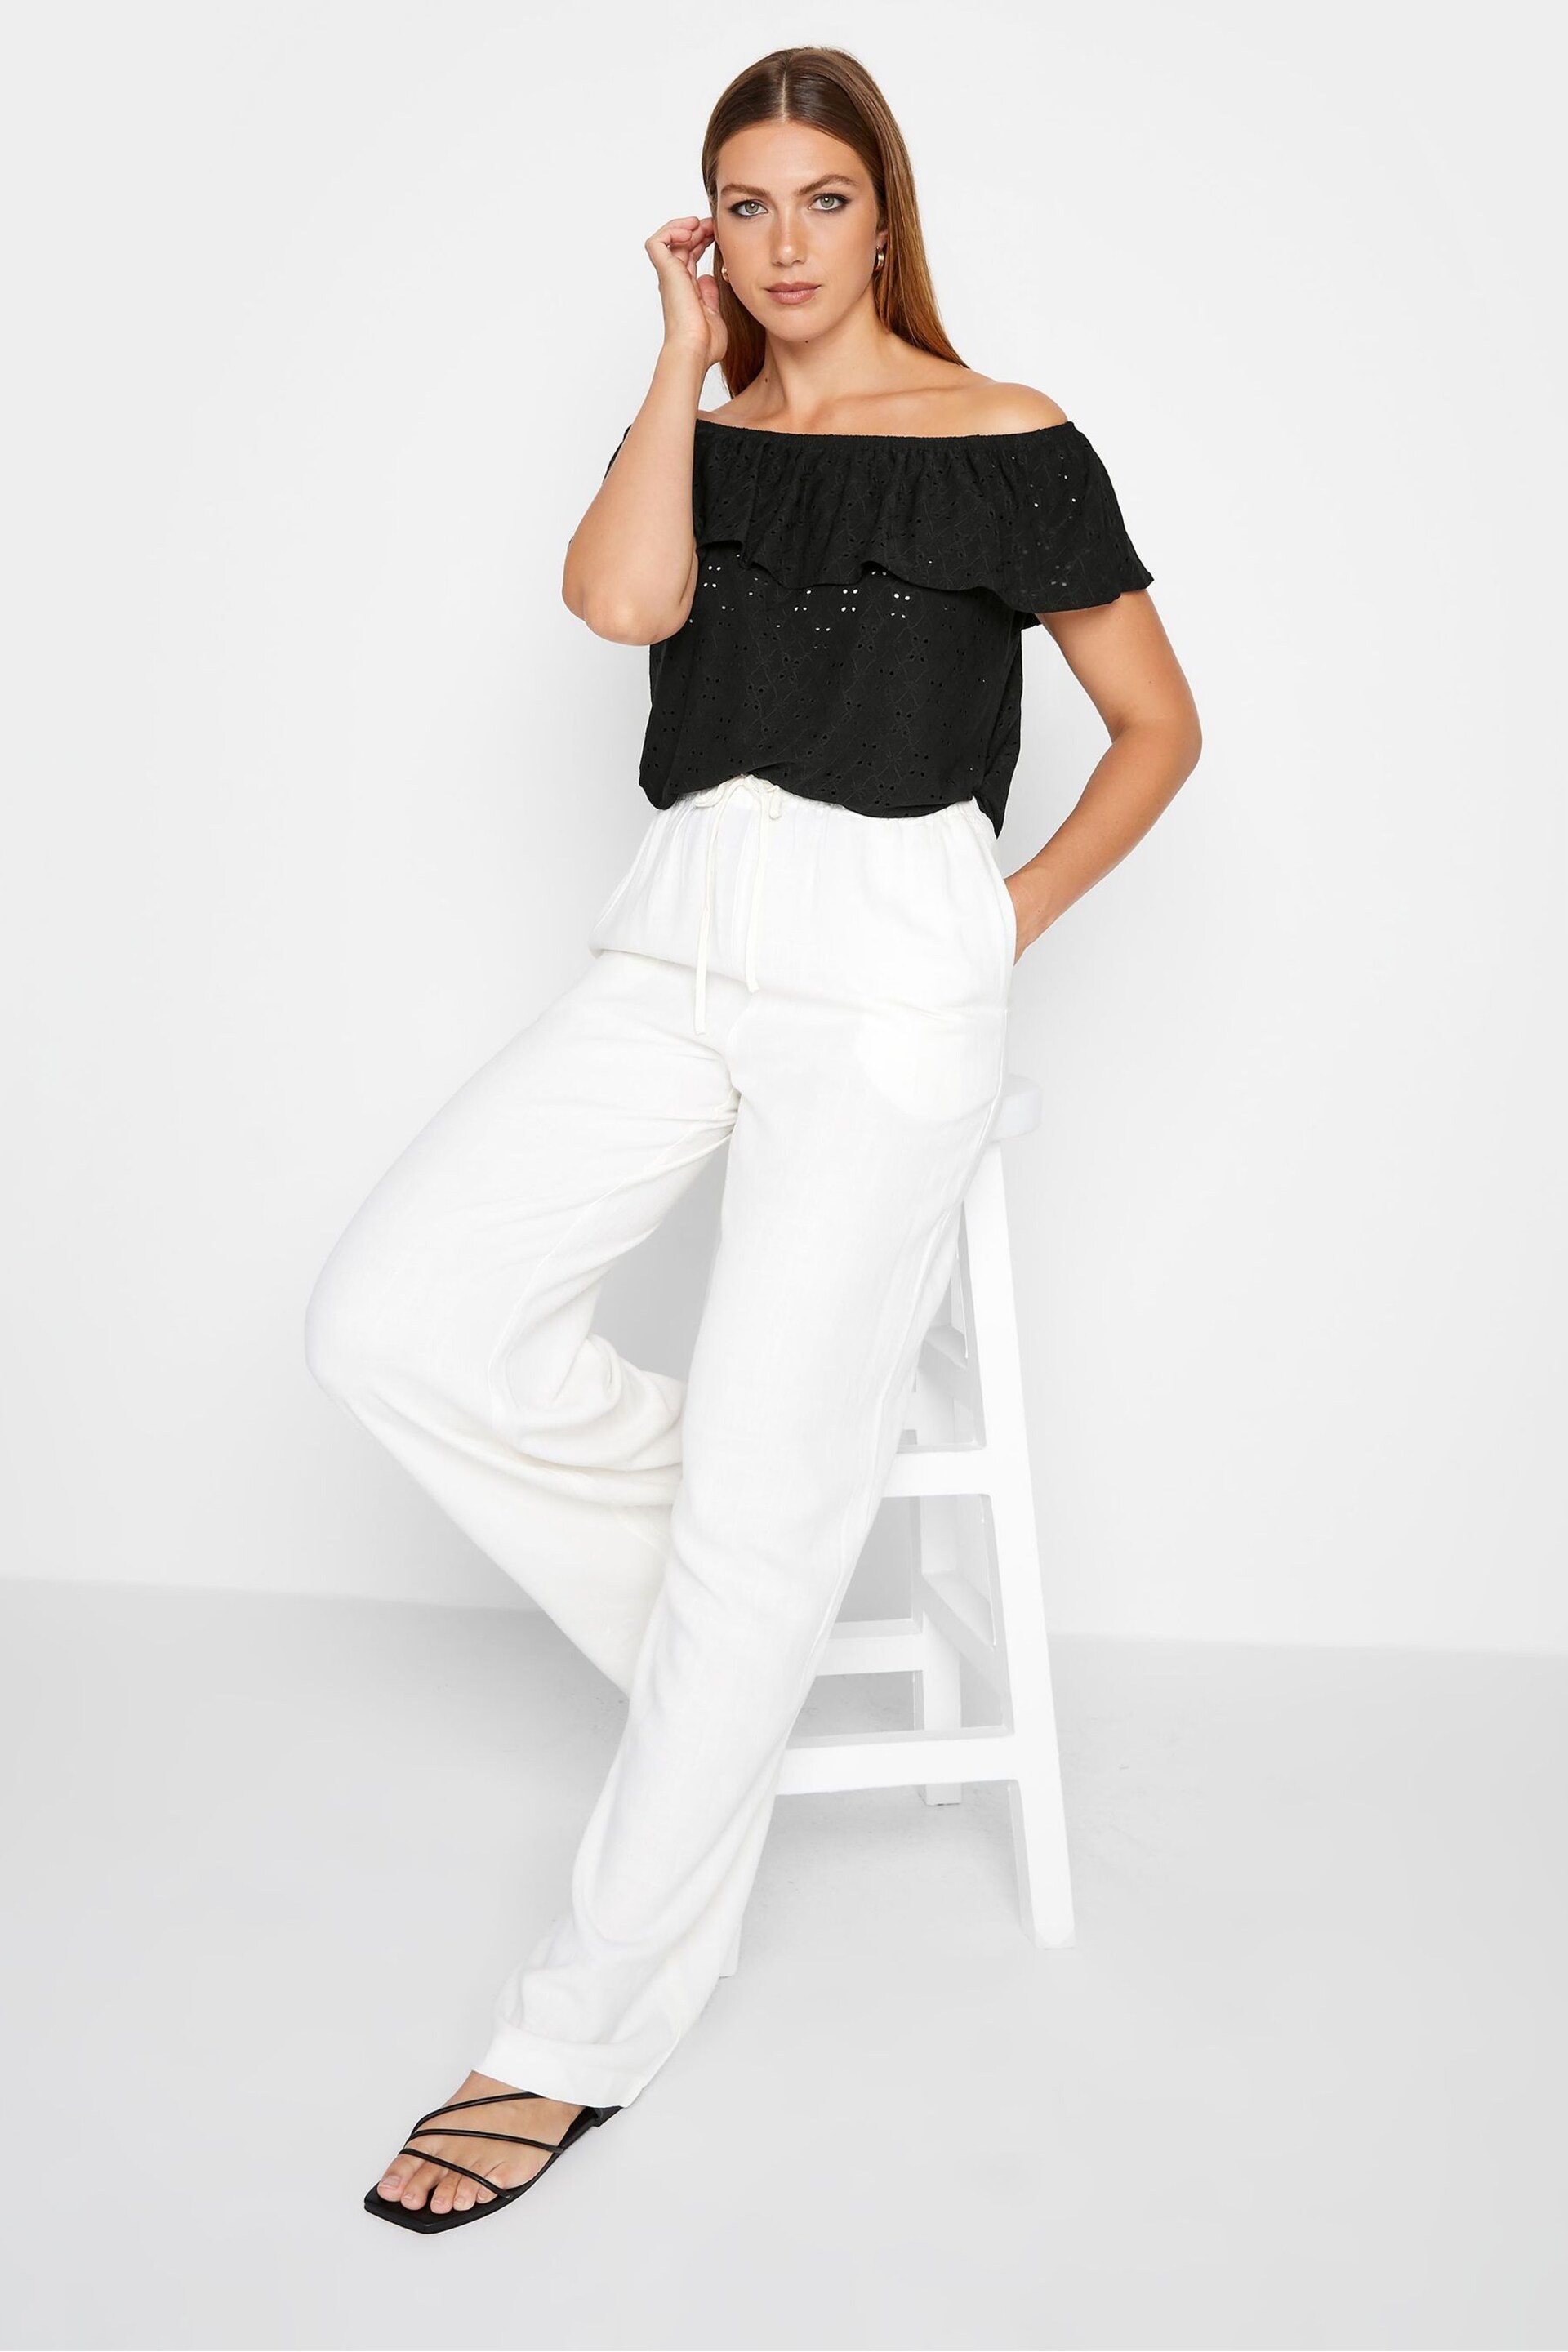 Long Tall Sally Black Broderie Frill Bardot Top - Image 2 of 4